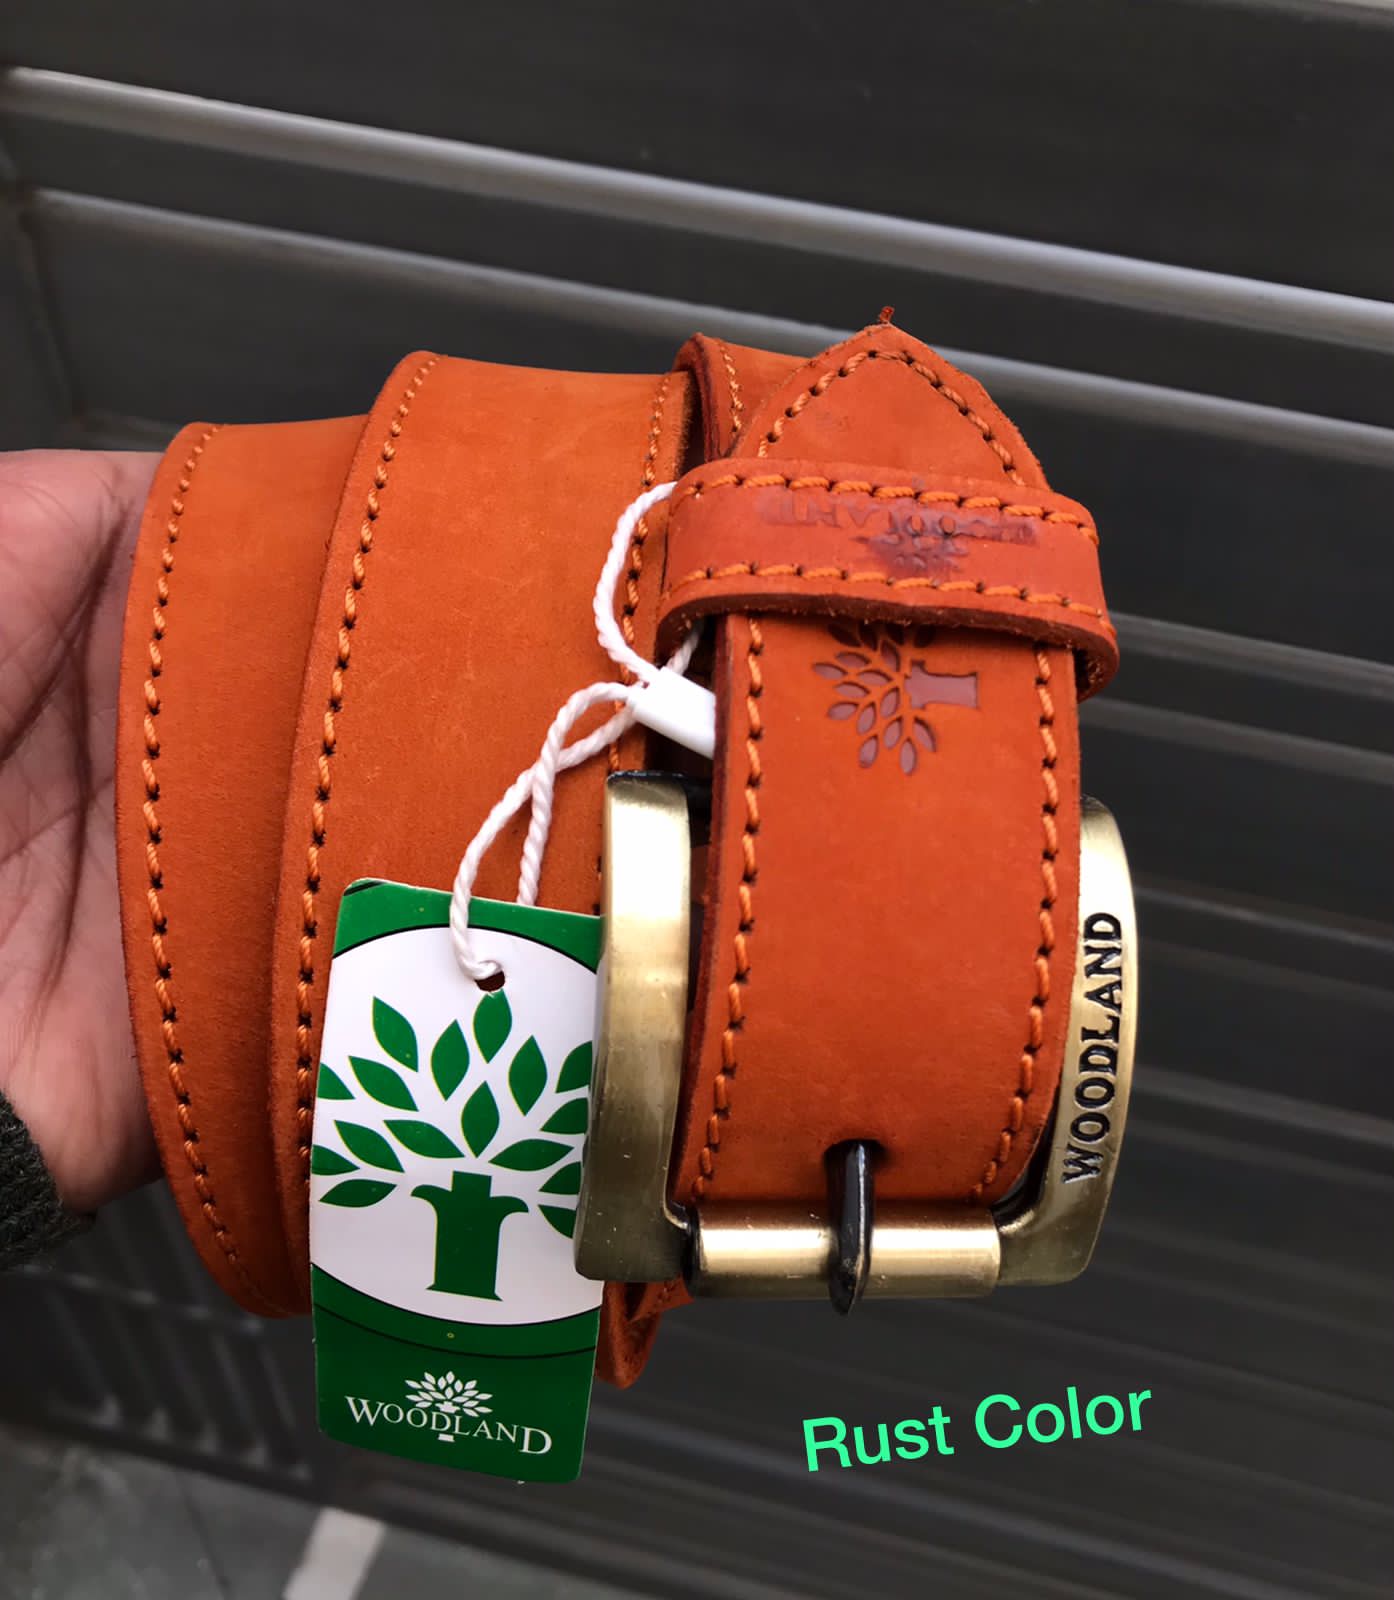 Details View - Woodland Belts photos - reseller,reseller marketplace,advetising your products,reseller bazzar,resellerbazzar.in,india's classified site,Woodland Belts , Buy Woodland Belts online, Woodland Belts in Ahmedabad ,Woodland Belts in Gujarat